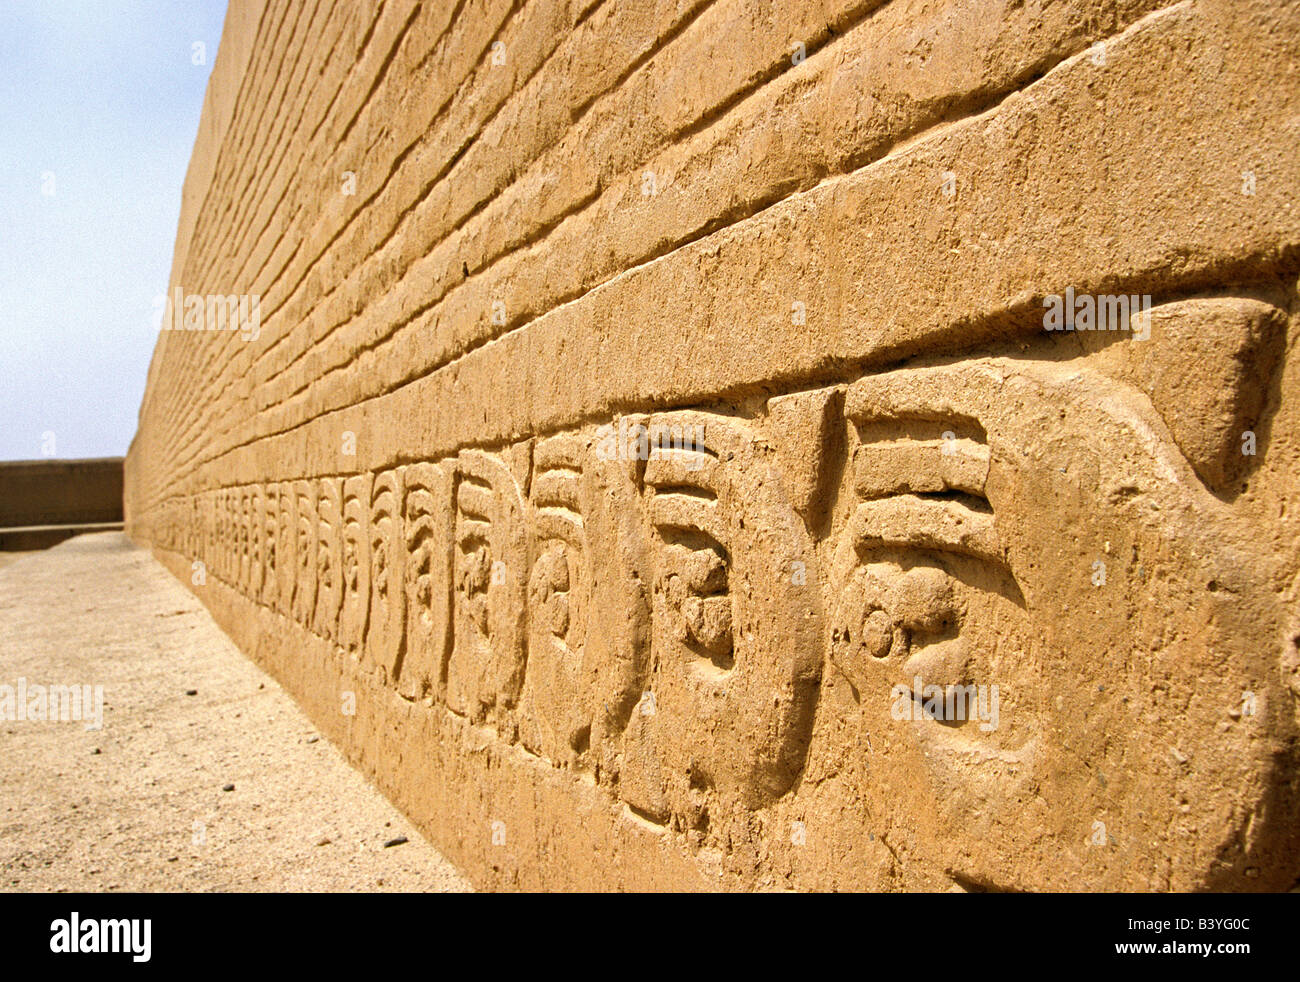 Peru, Trujillo, Chan Chan. The adobe walls of the Ceremonial Courtyard in the Tschudi Complex, decorated with bas relief designs featuring sea otters and waves. The Complex is part of the ancient Chimu site of Chan Chan, in northern Peru Stock Photo